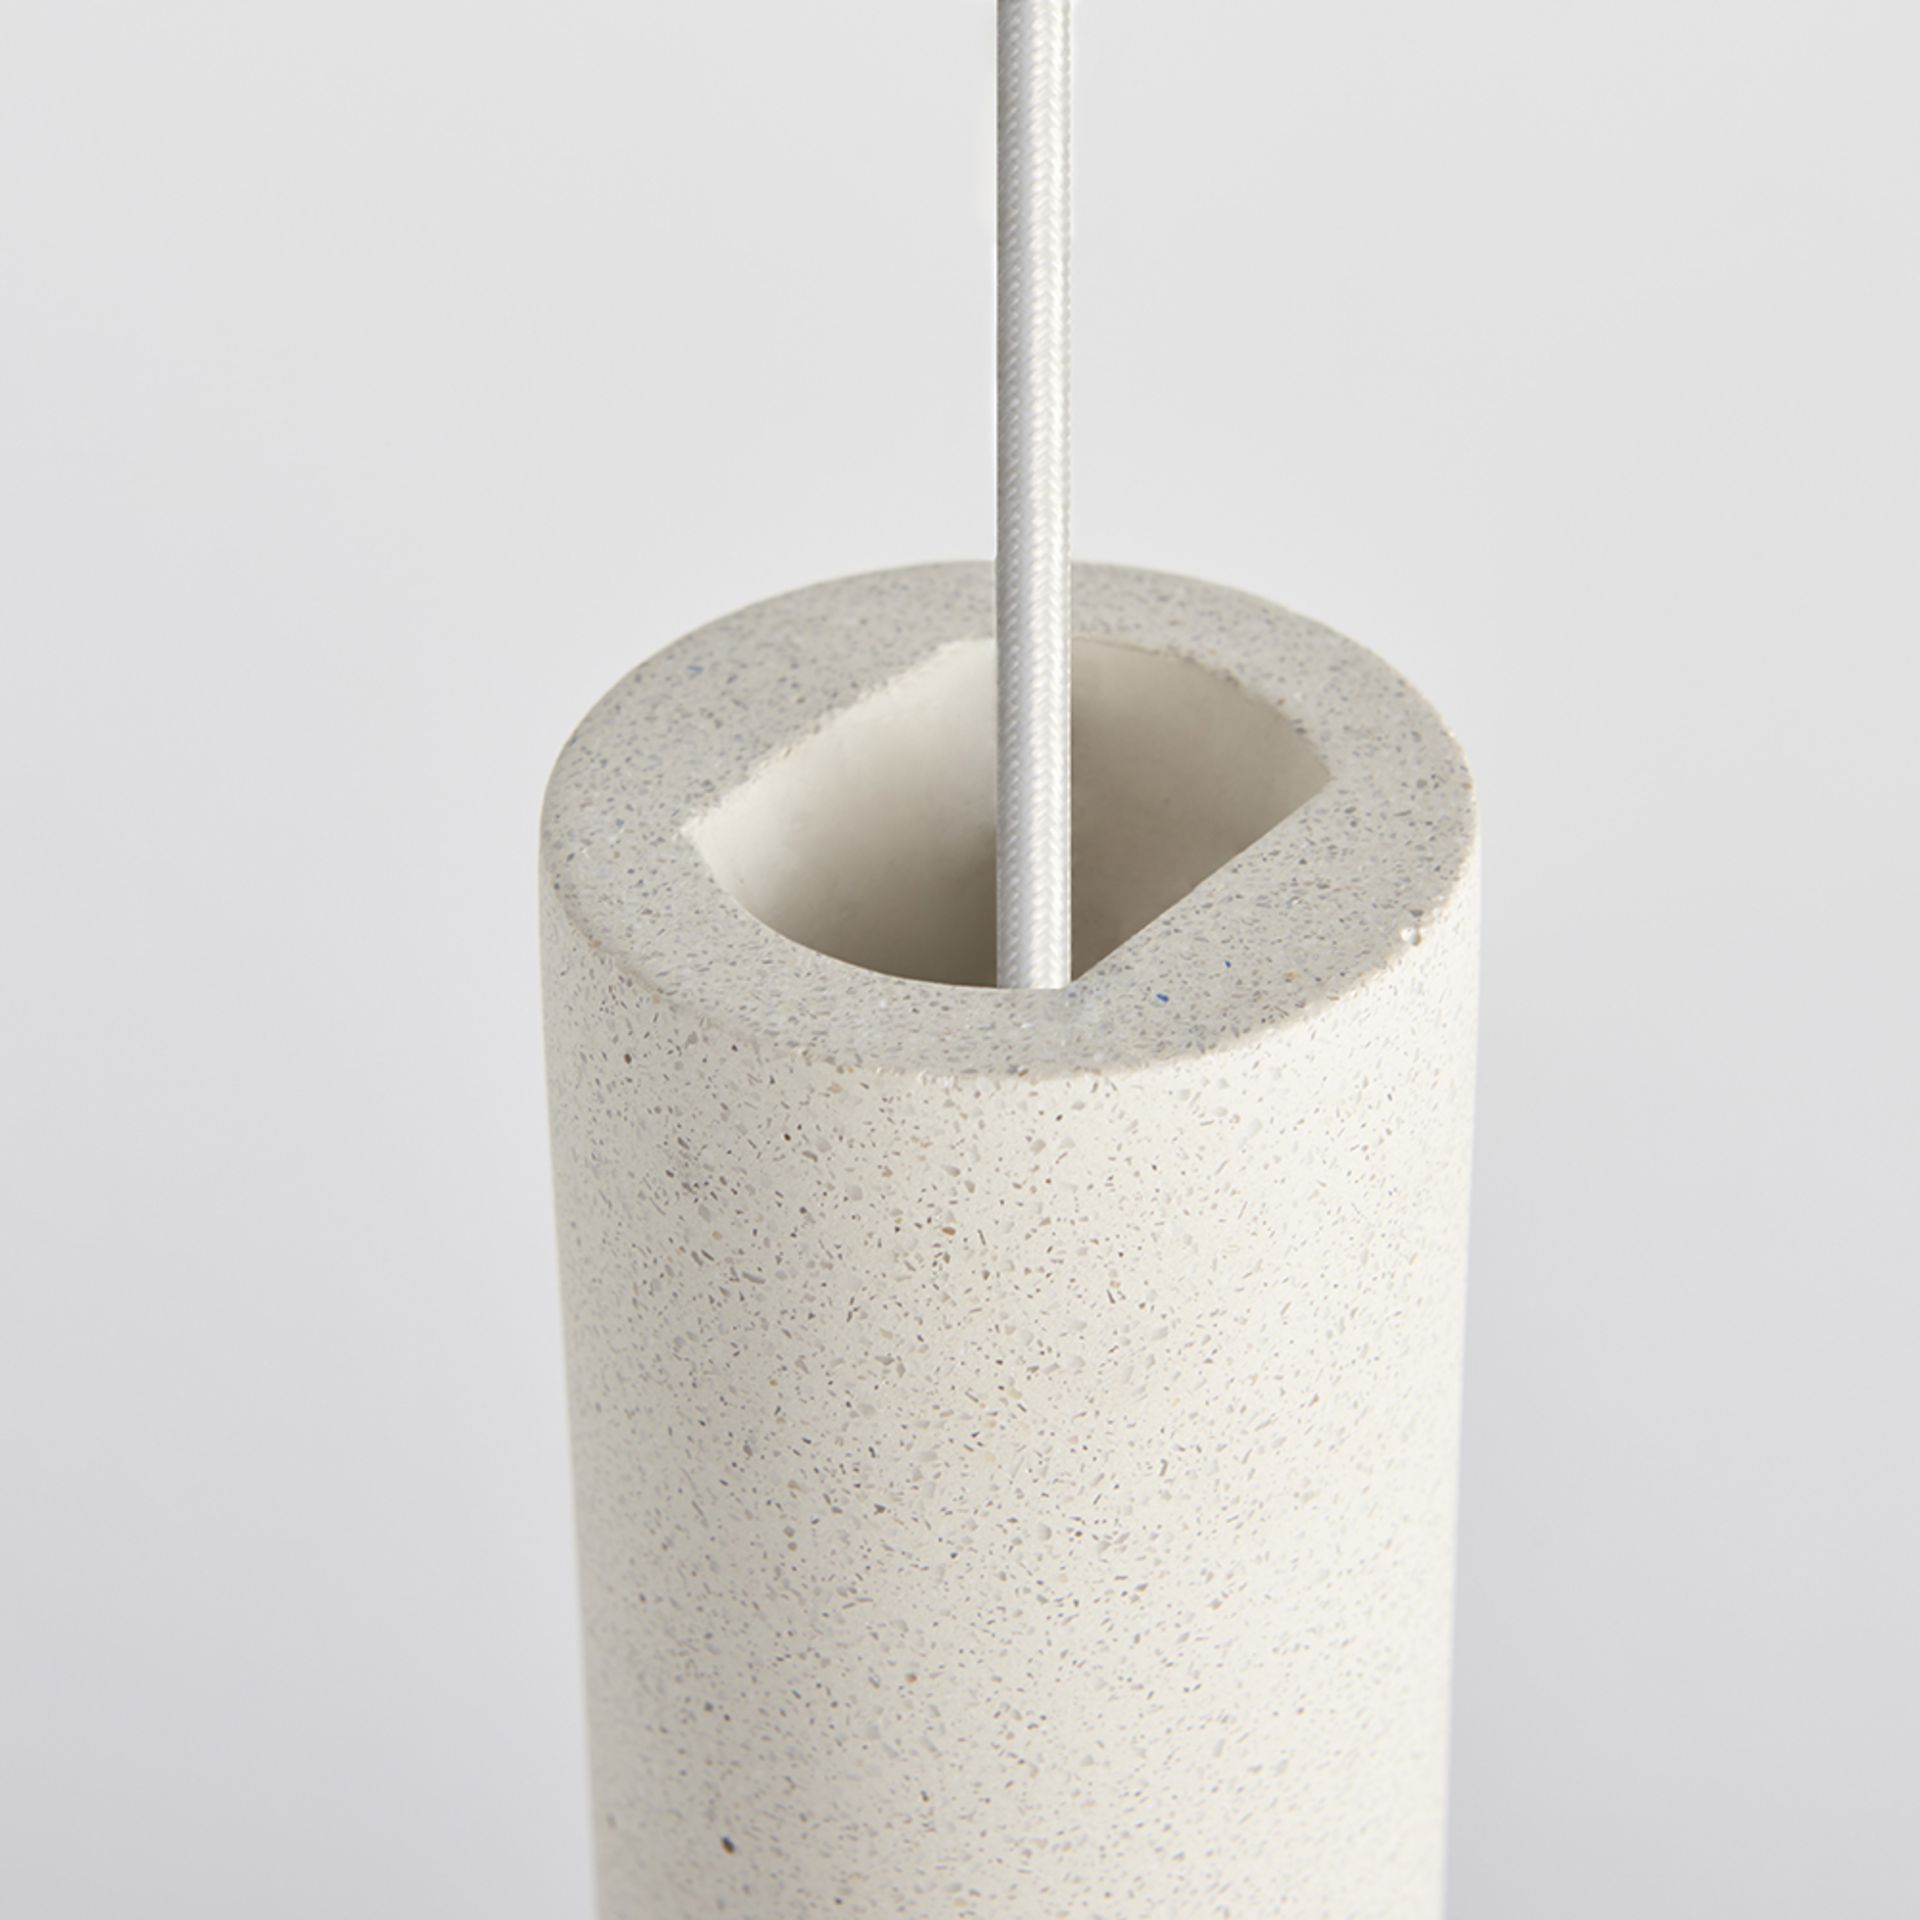 Endon Lighting Architectural inspired white sandstone concrete finish pendant, suspended from - Image 2 of 5